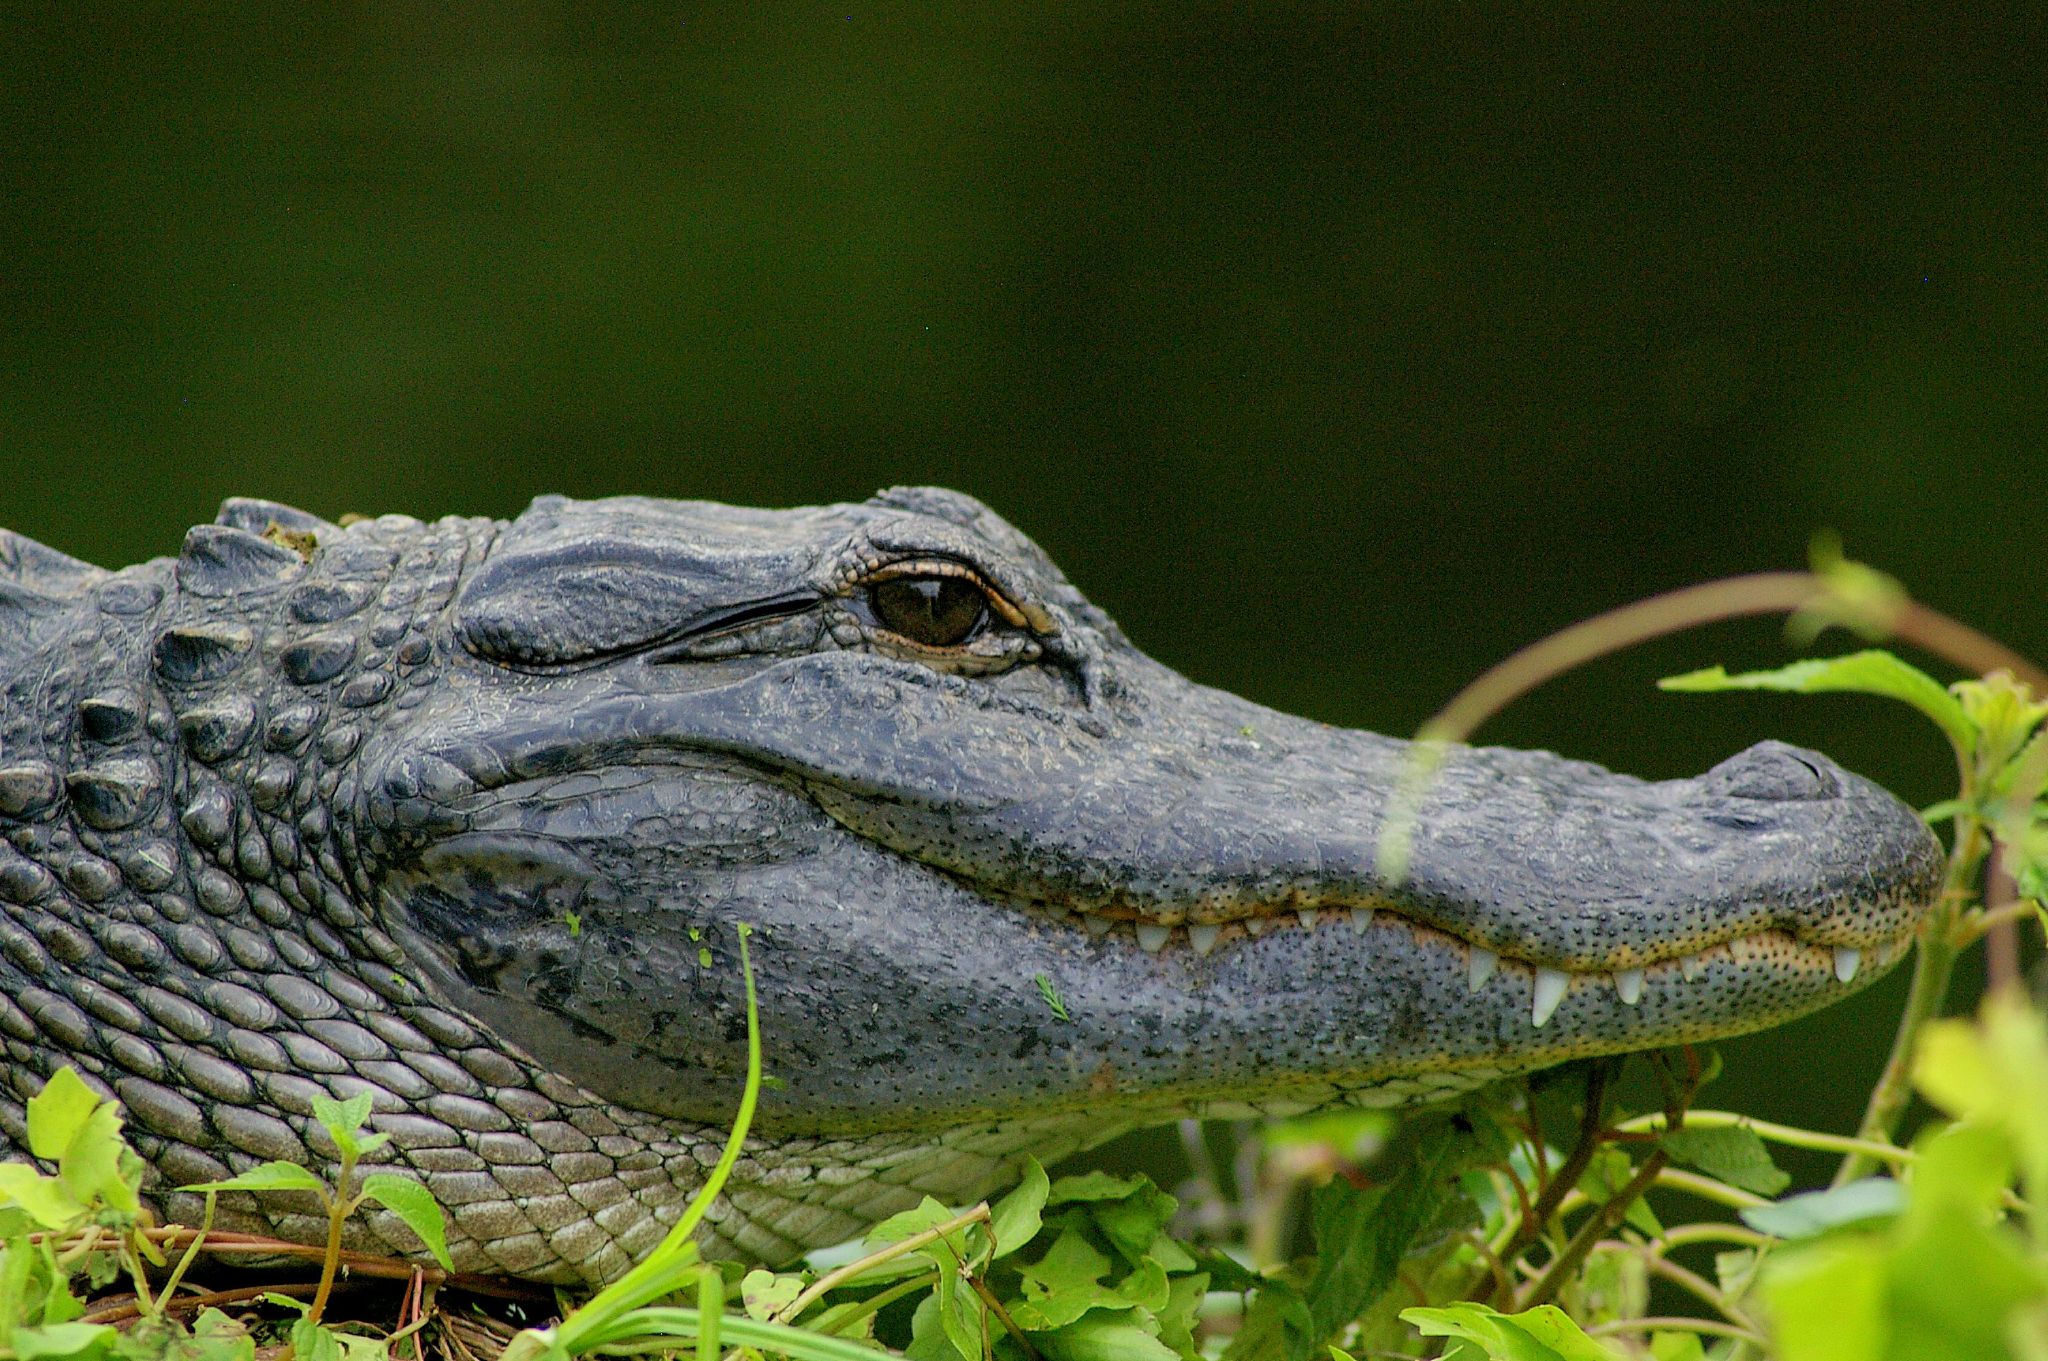 a close up of a large alligator laying in a grassy field